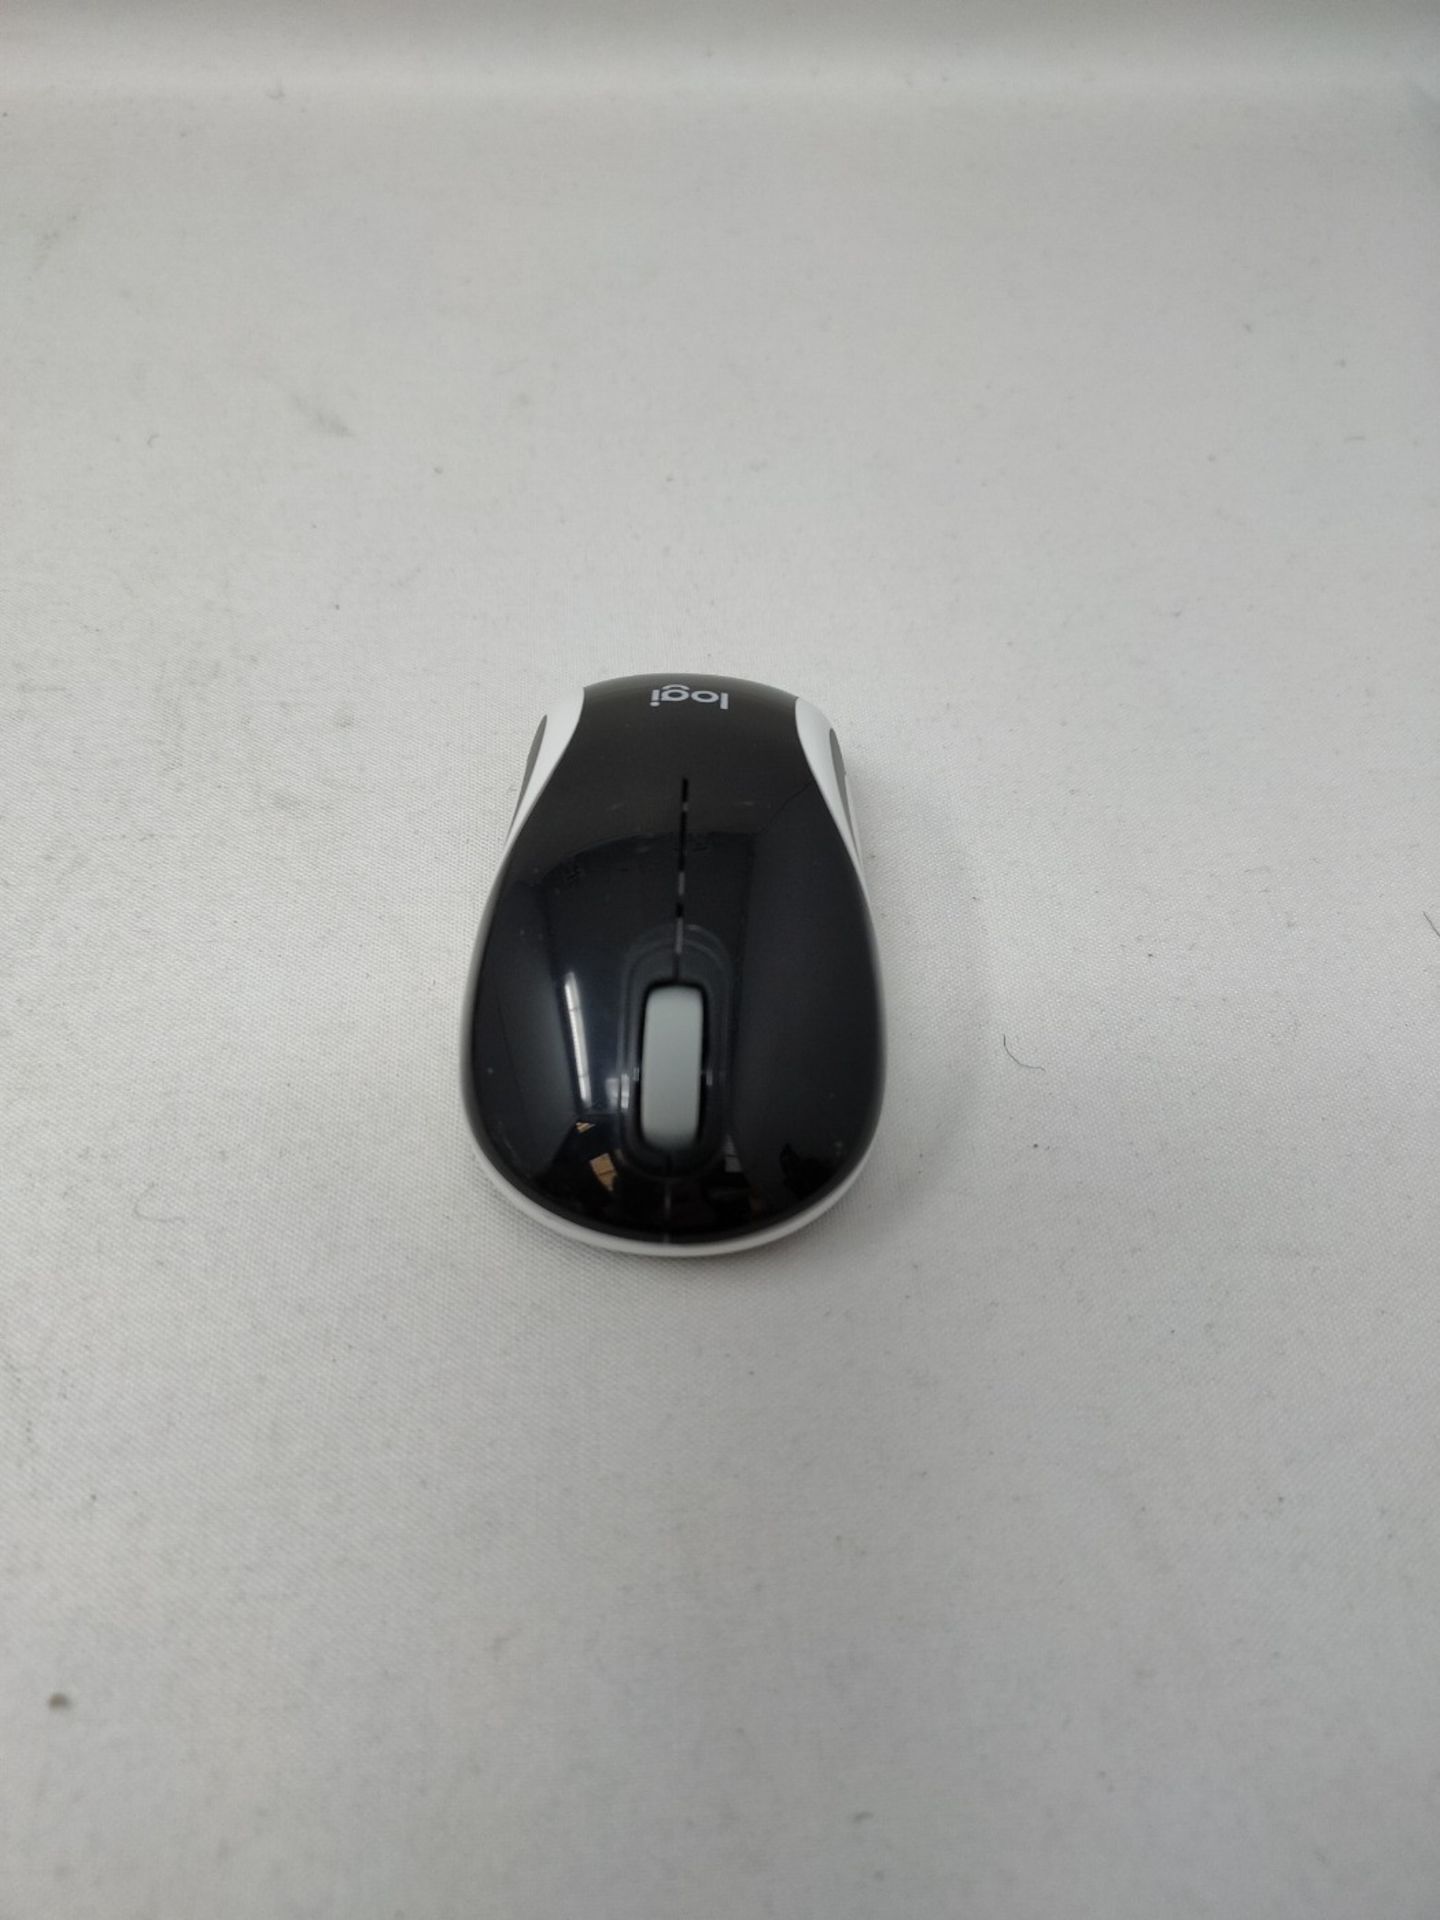 Logitech M187 Ultra Portable Wireless Mouse, 2.4 GHz with USB Receiver, 1000 DPI Optic - Image 2 of 2